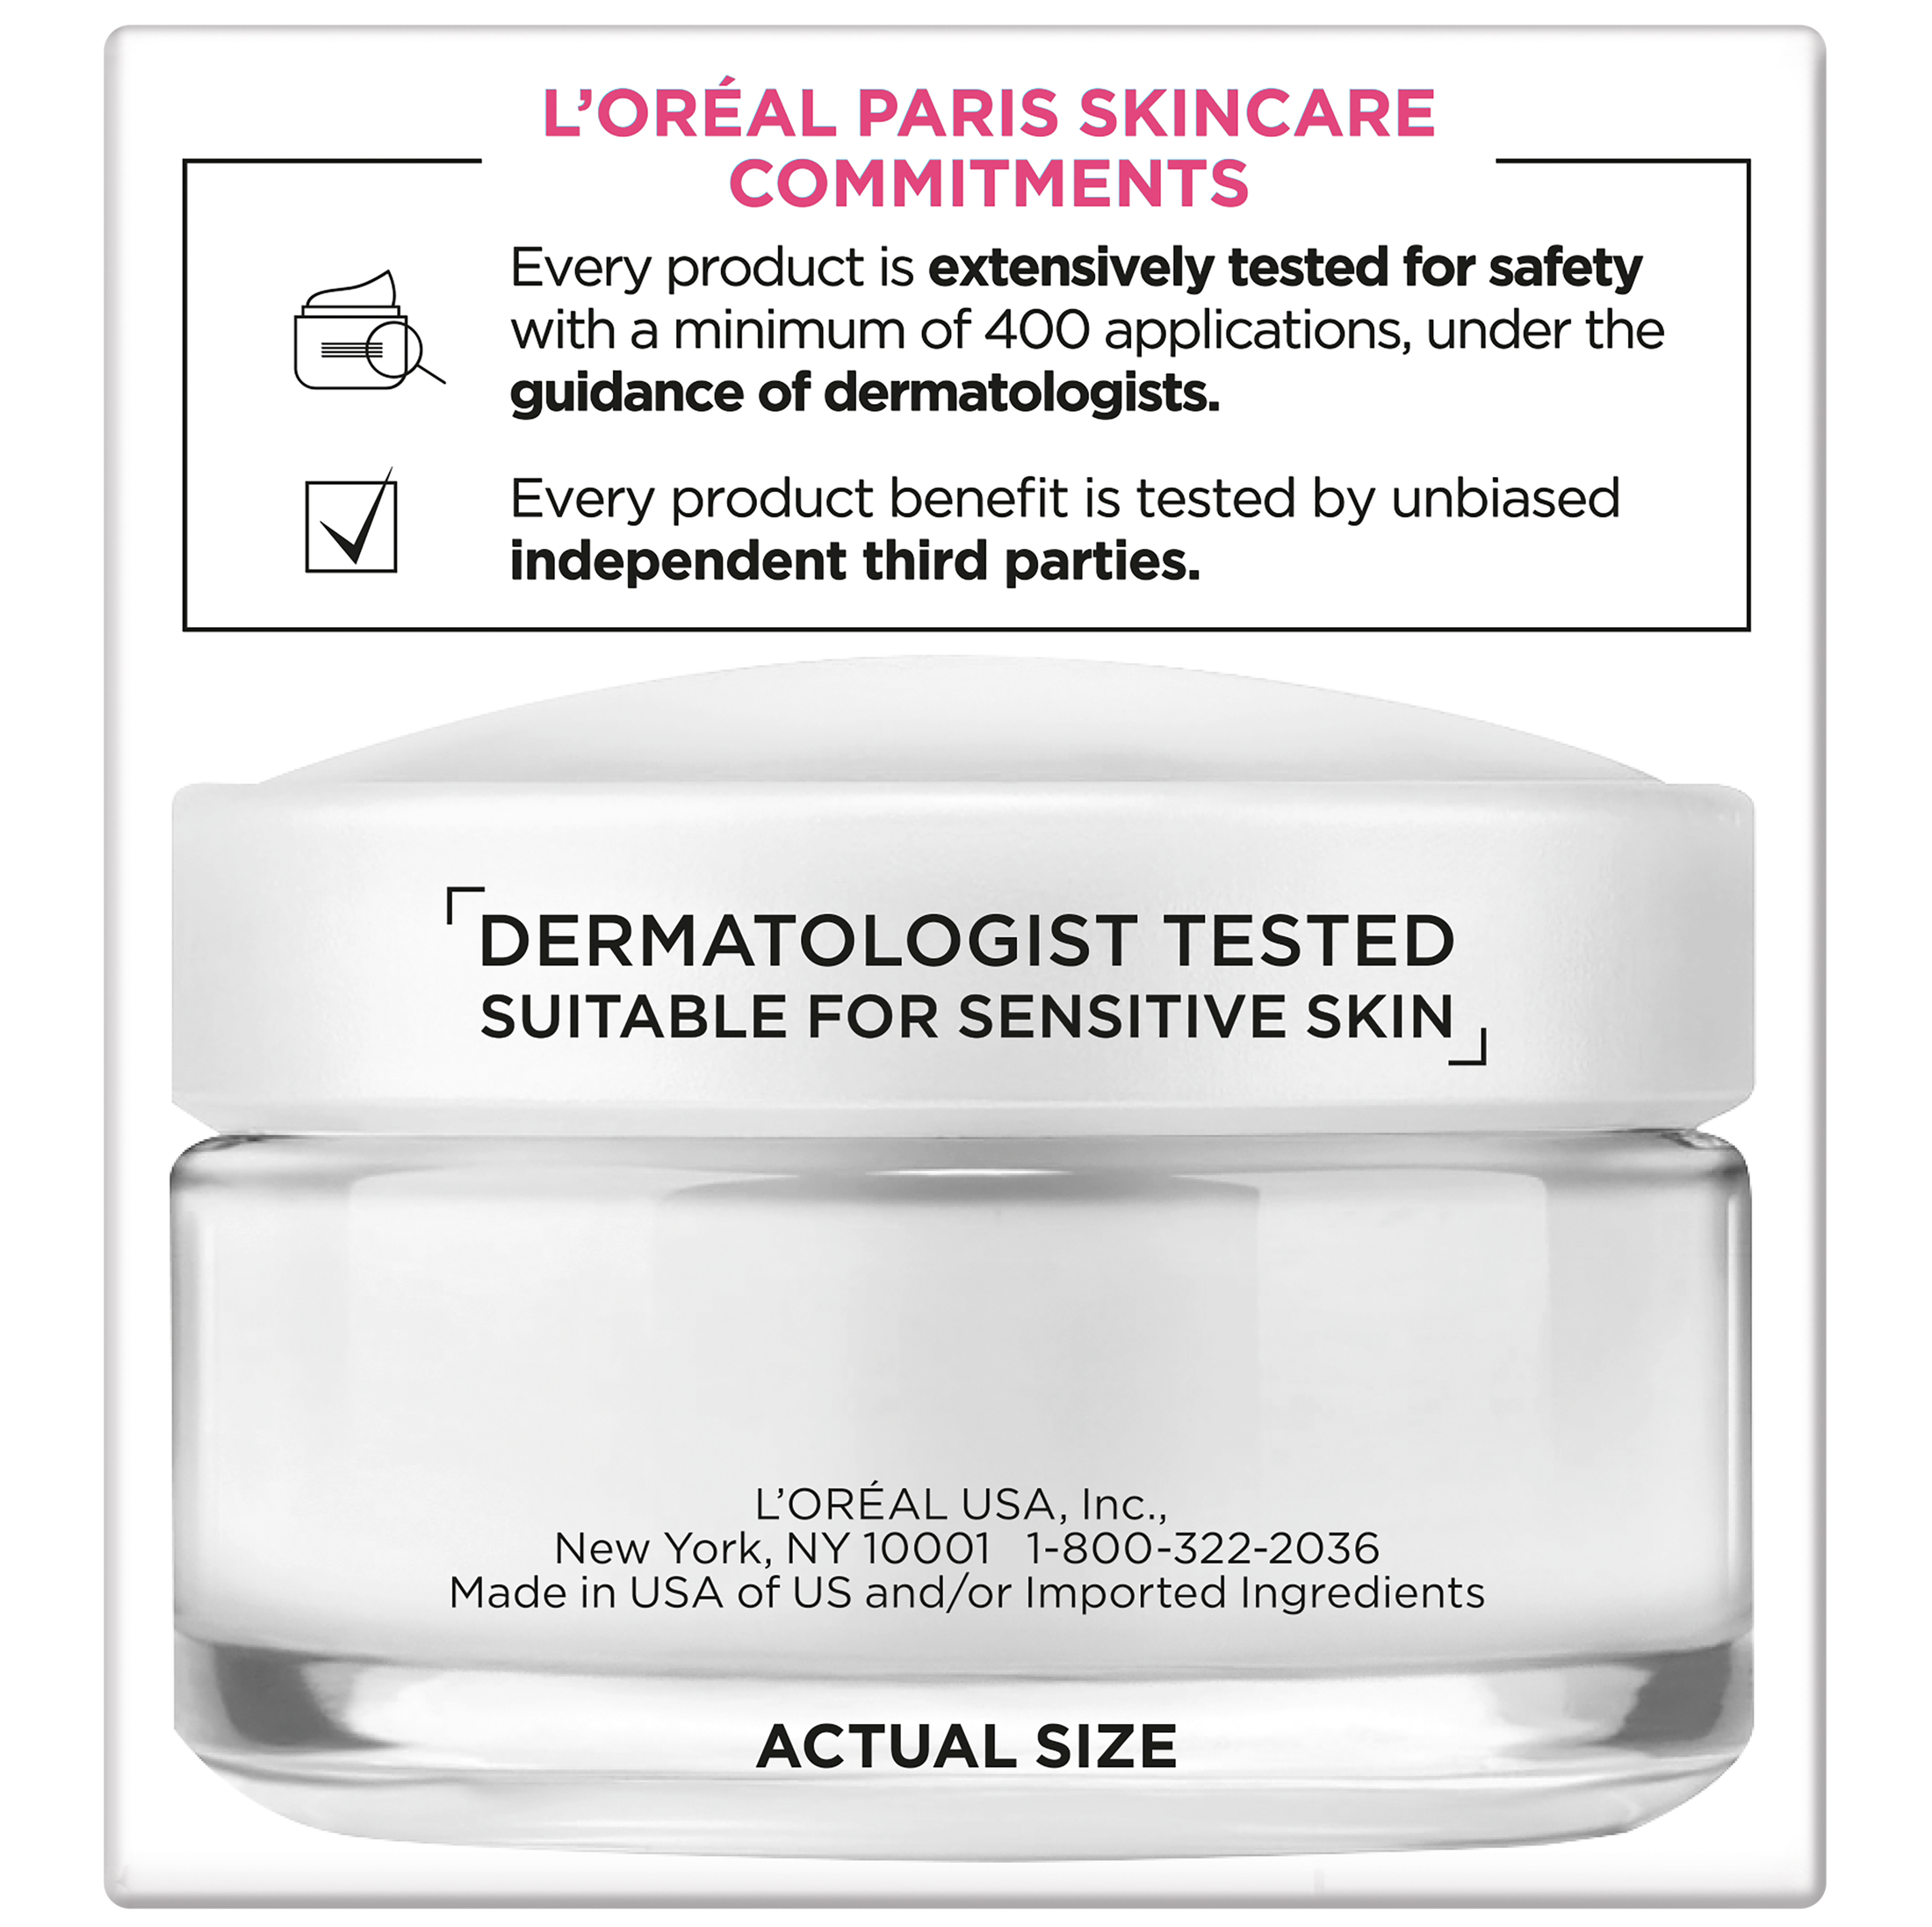 L'Oreal Paris Wrinkle Expert 45+ Day and Night Moisturizer, 1.7 oz - image 5 of 5